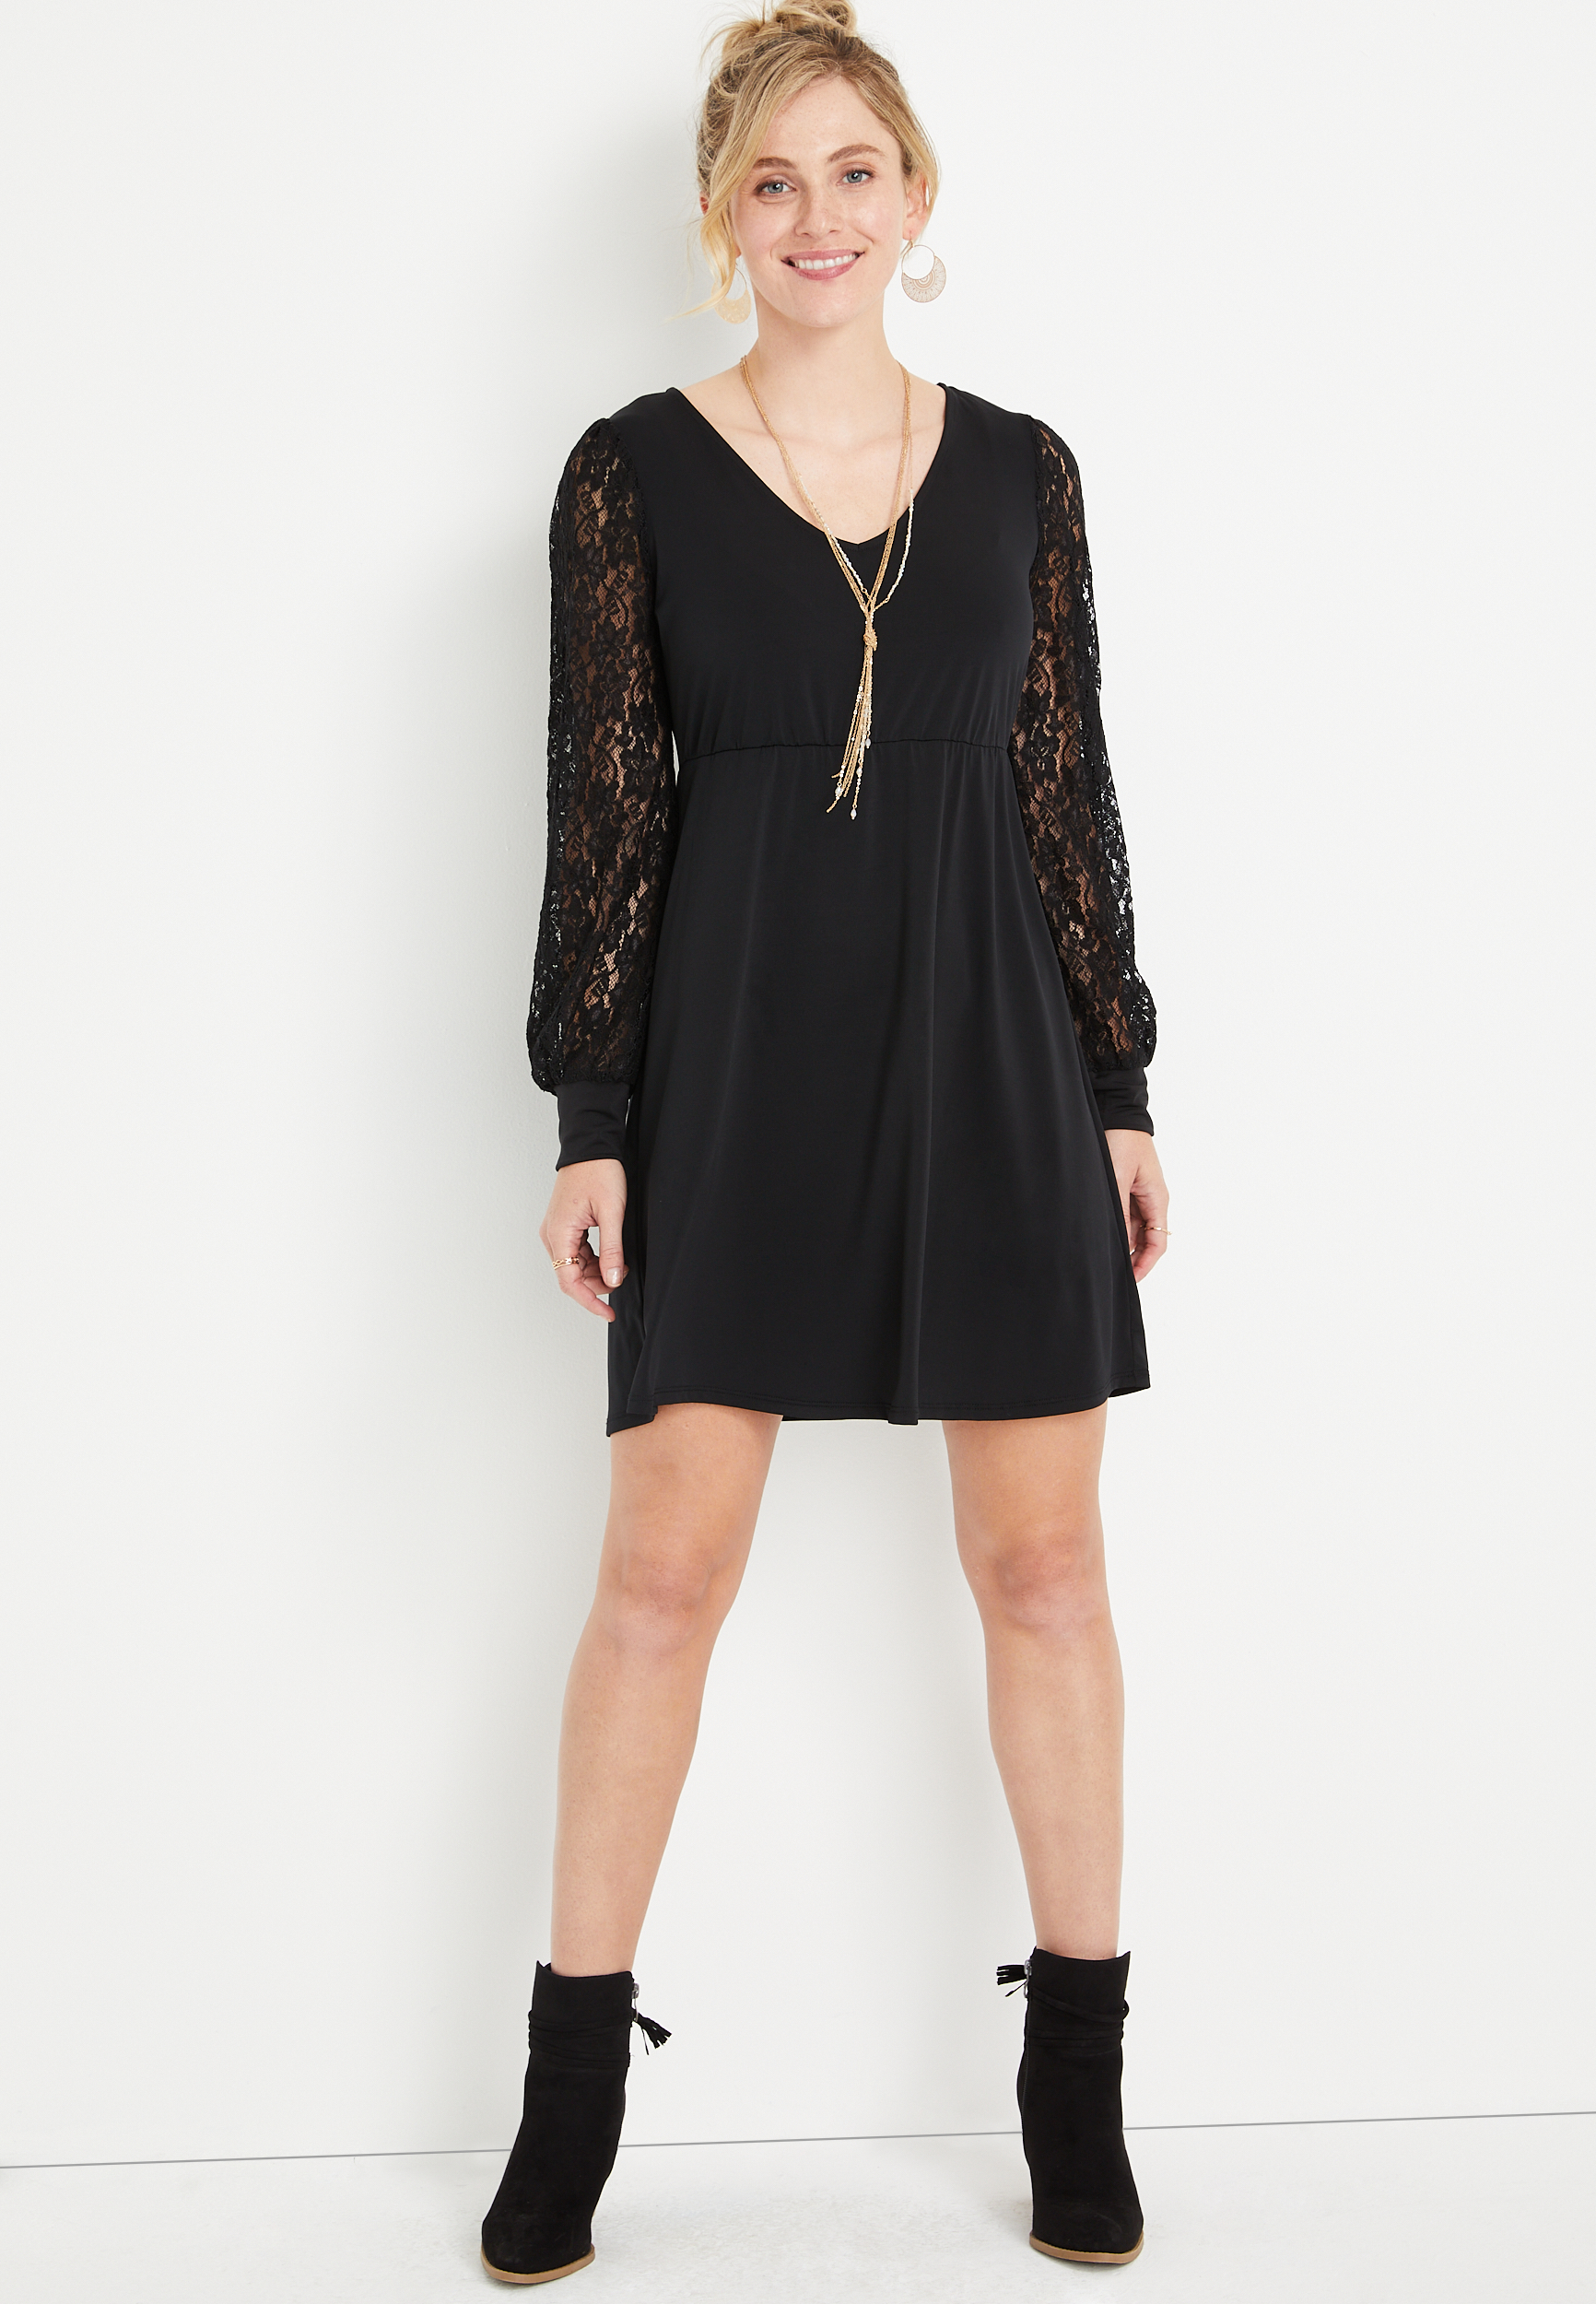 dress with lace sleeves black